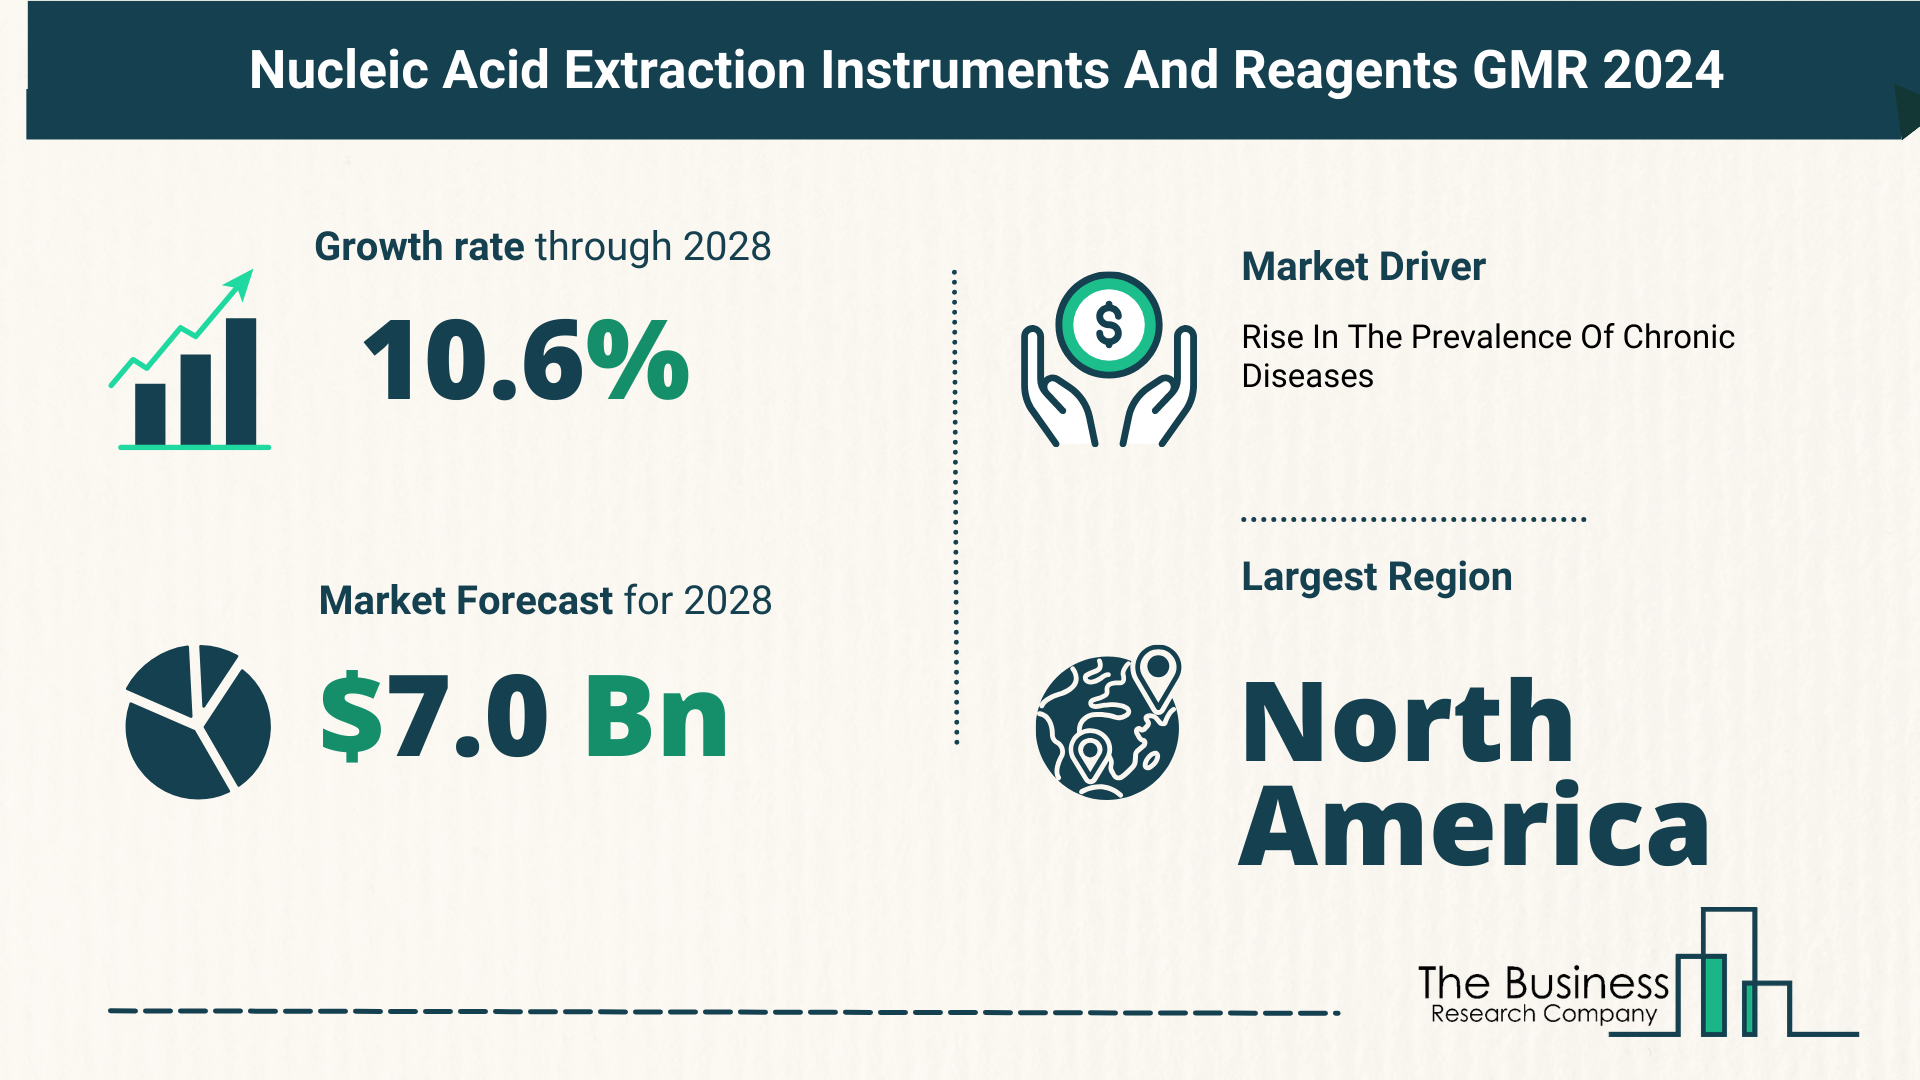 Key Trends And Drivers In The Nucleic Acid Extraction Instruments And Reagents Market 2024